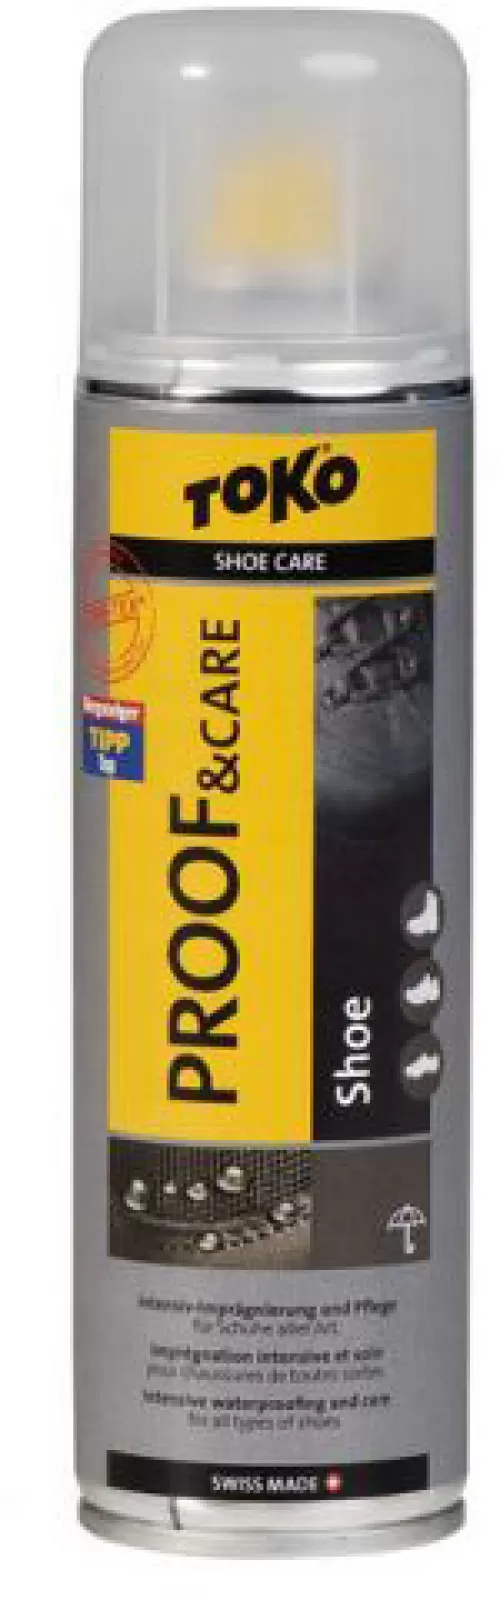 Care Proof Impregnation for Shoes